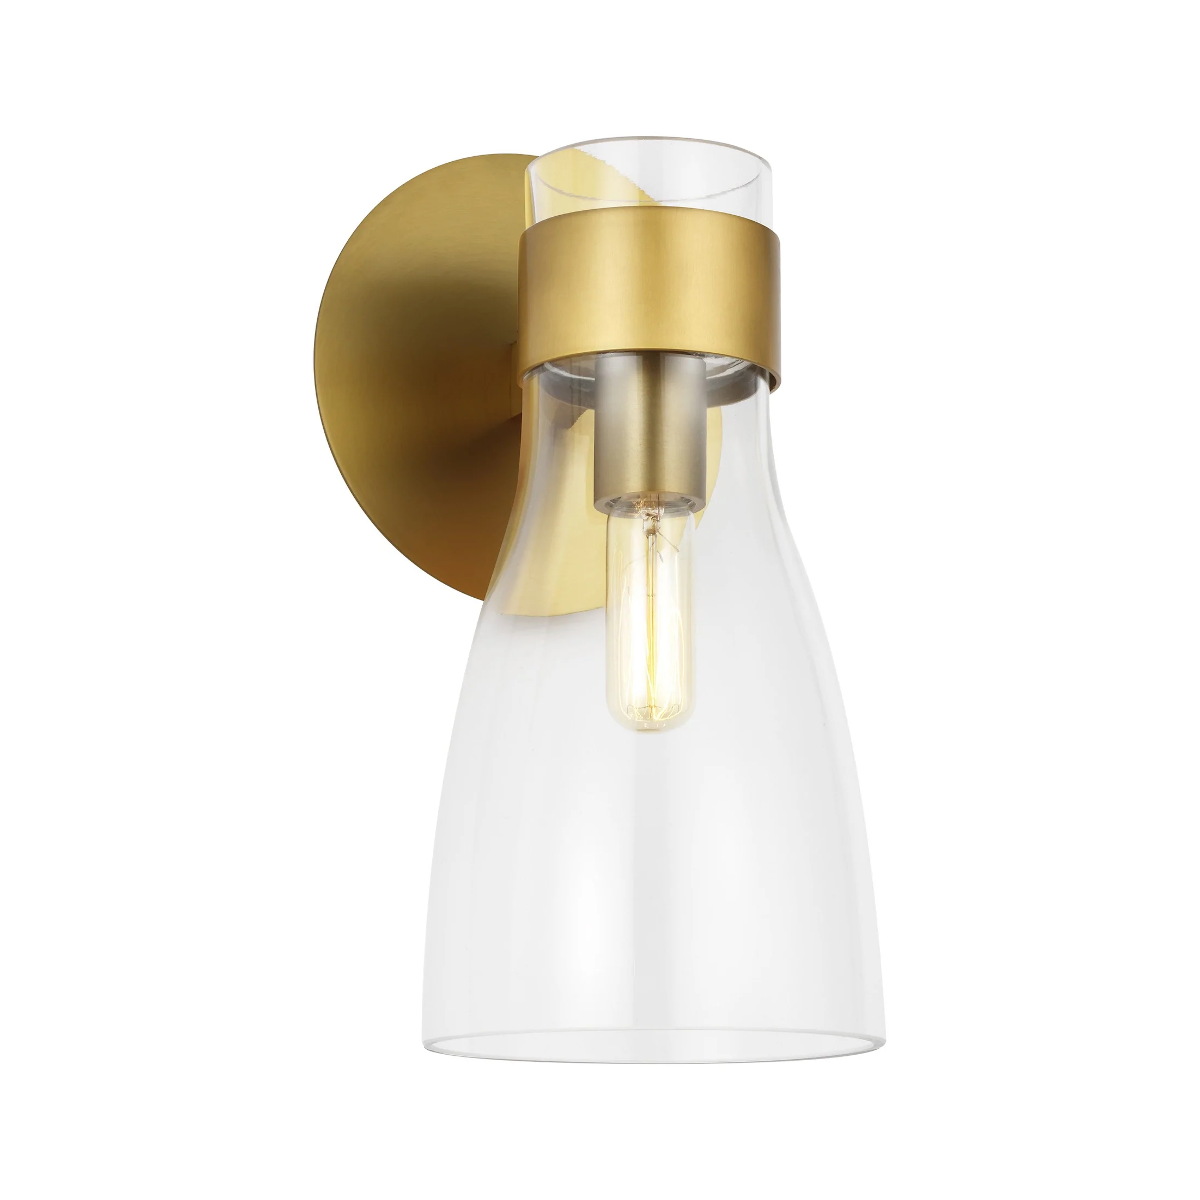 Moritz Burnished Brass wall Light with Clear Glass